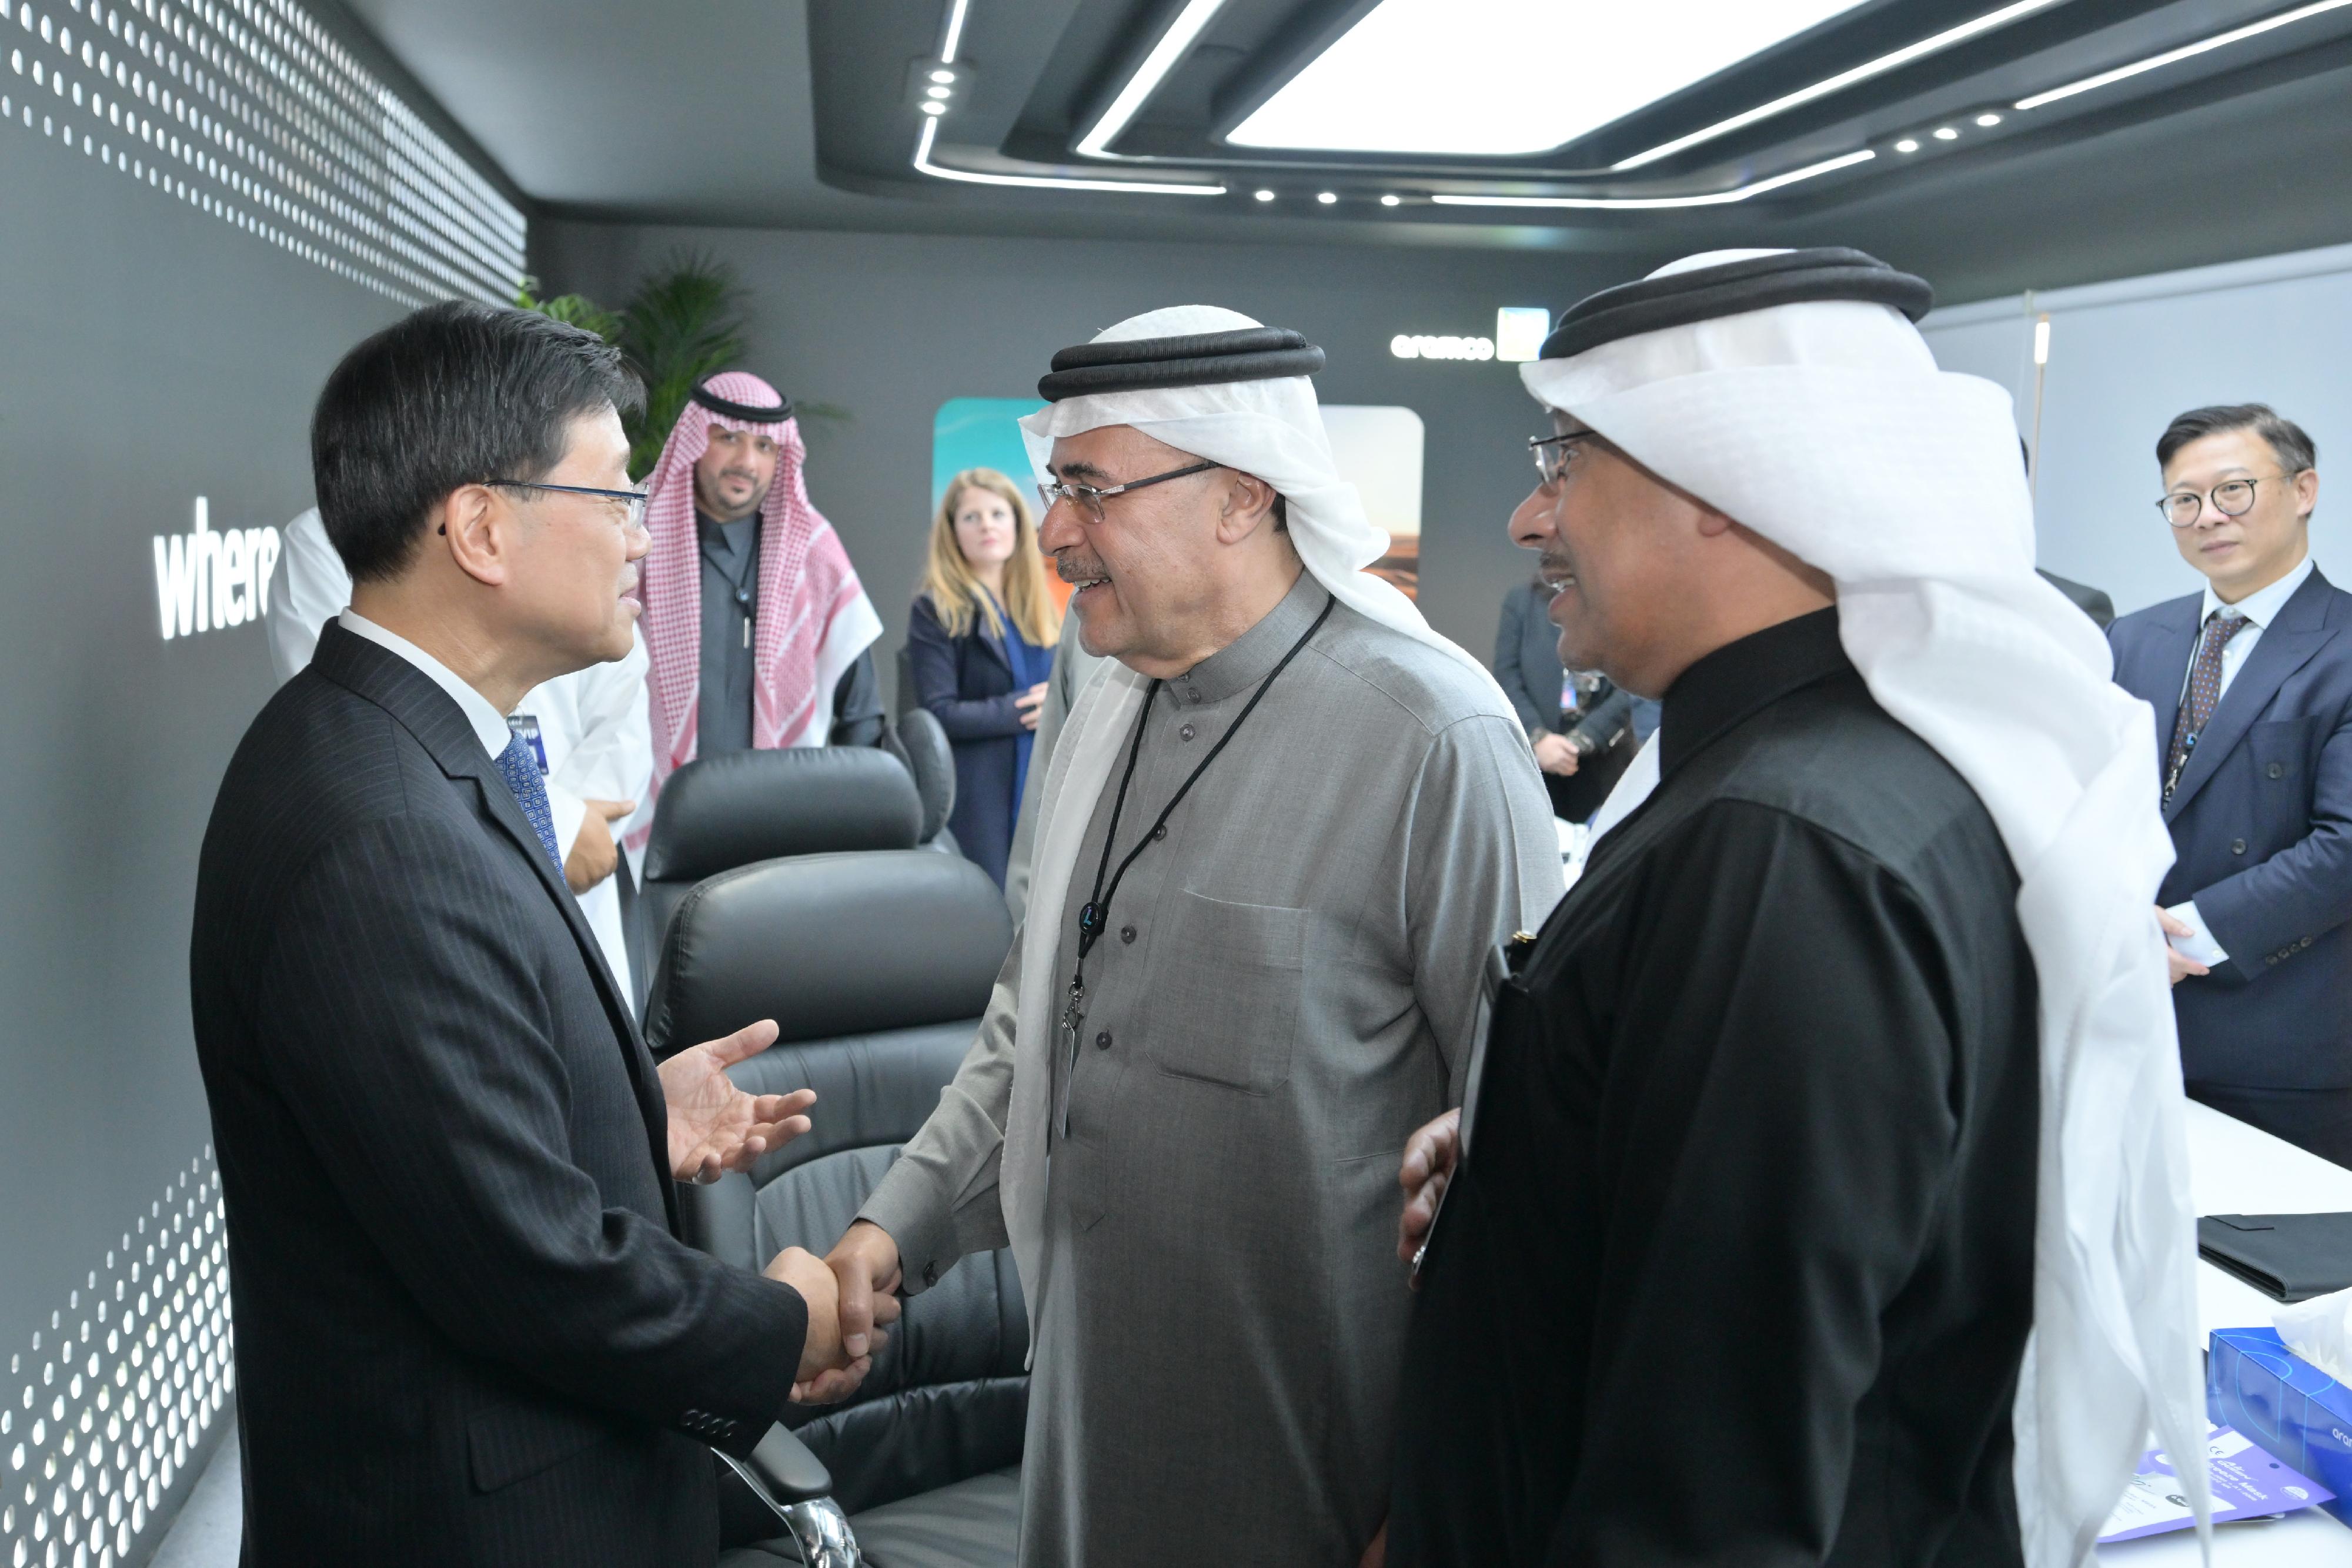 The Chief Executive, Mr John Lee (first left), meets with the President and Chief Executive Officer of Saudi Aramco, Mr Amin H Nasser (second right), in the LEAP 2023 technology conference, Riyadh, Saudi Arabia, today (February 6, Riyadh time). 